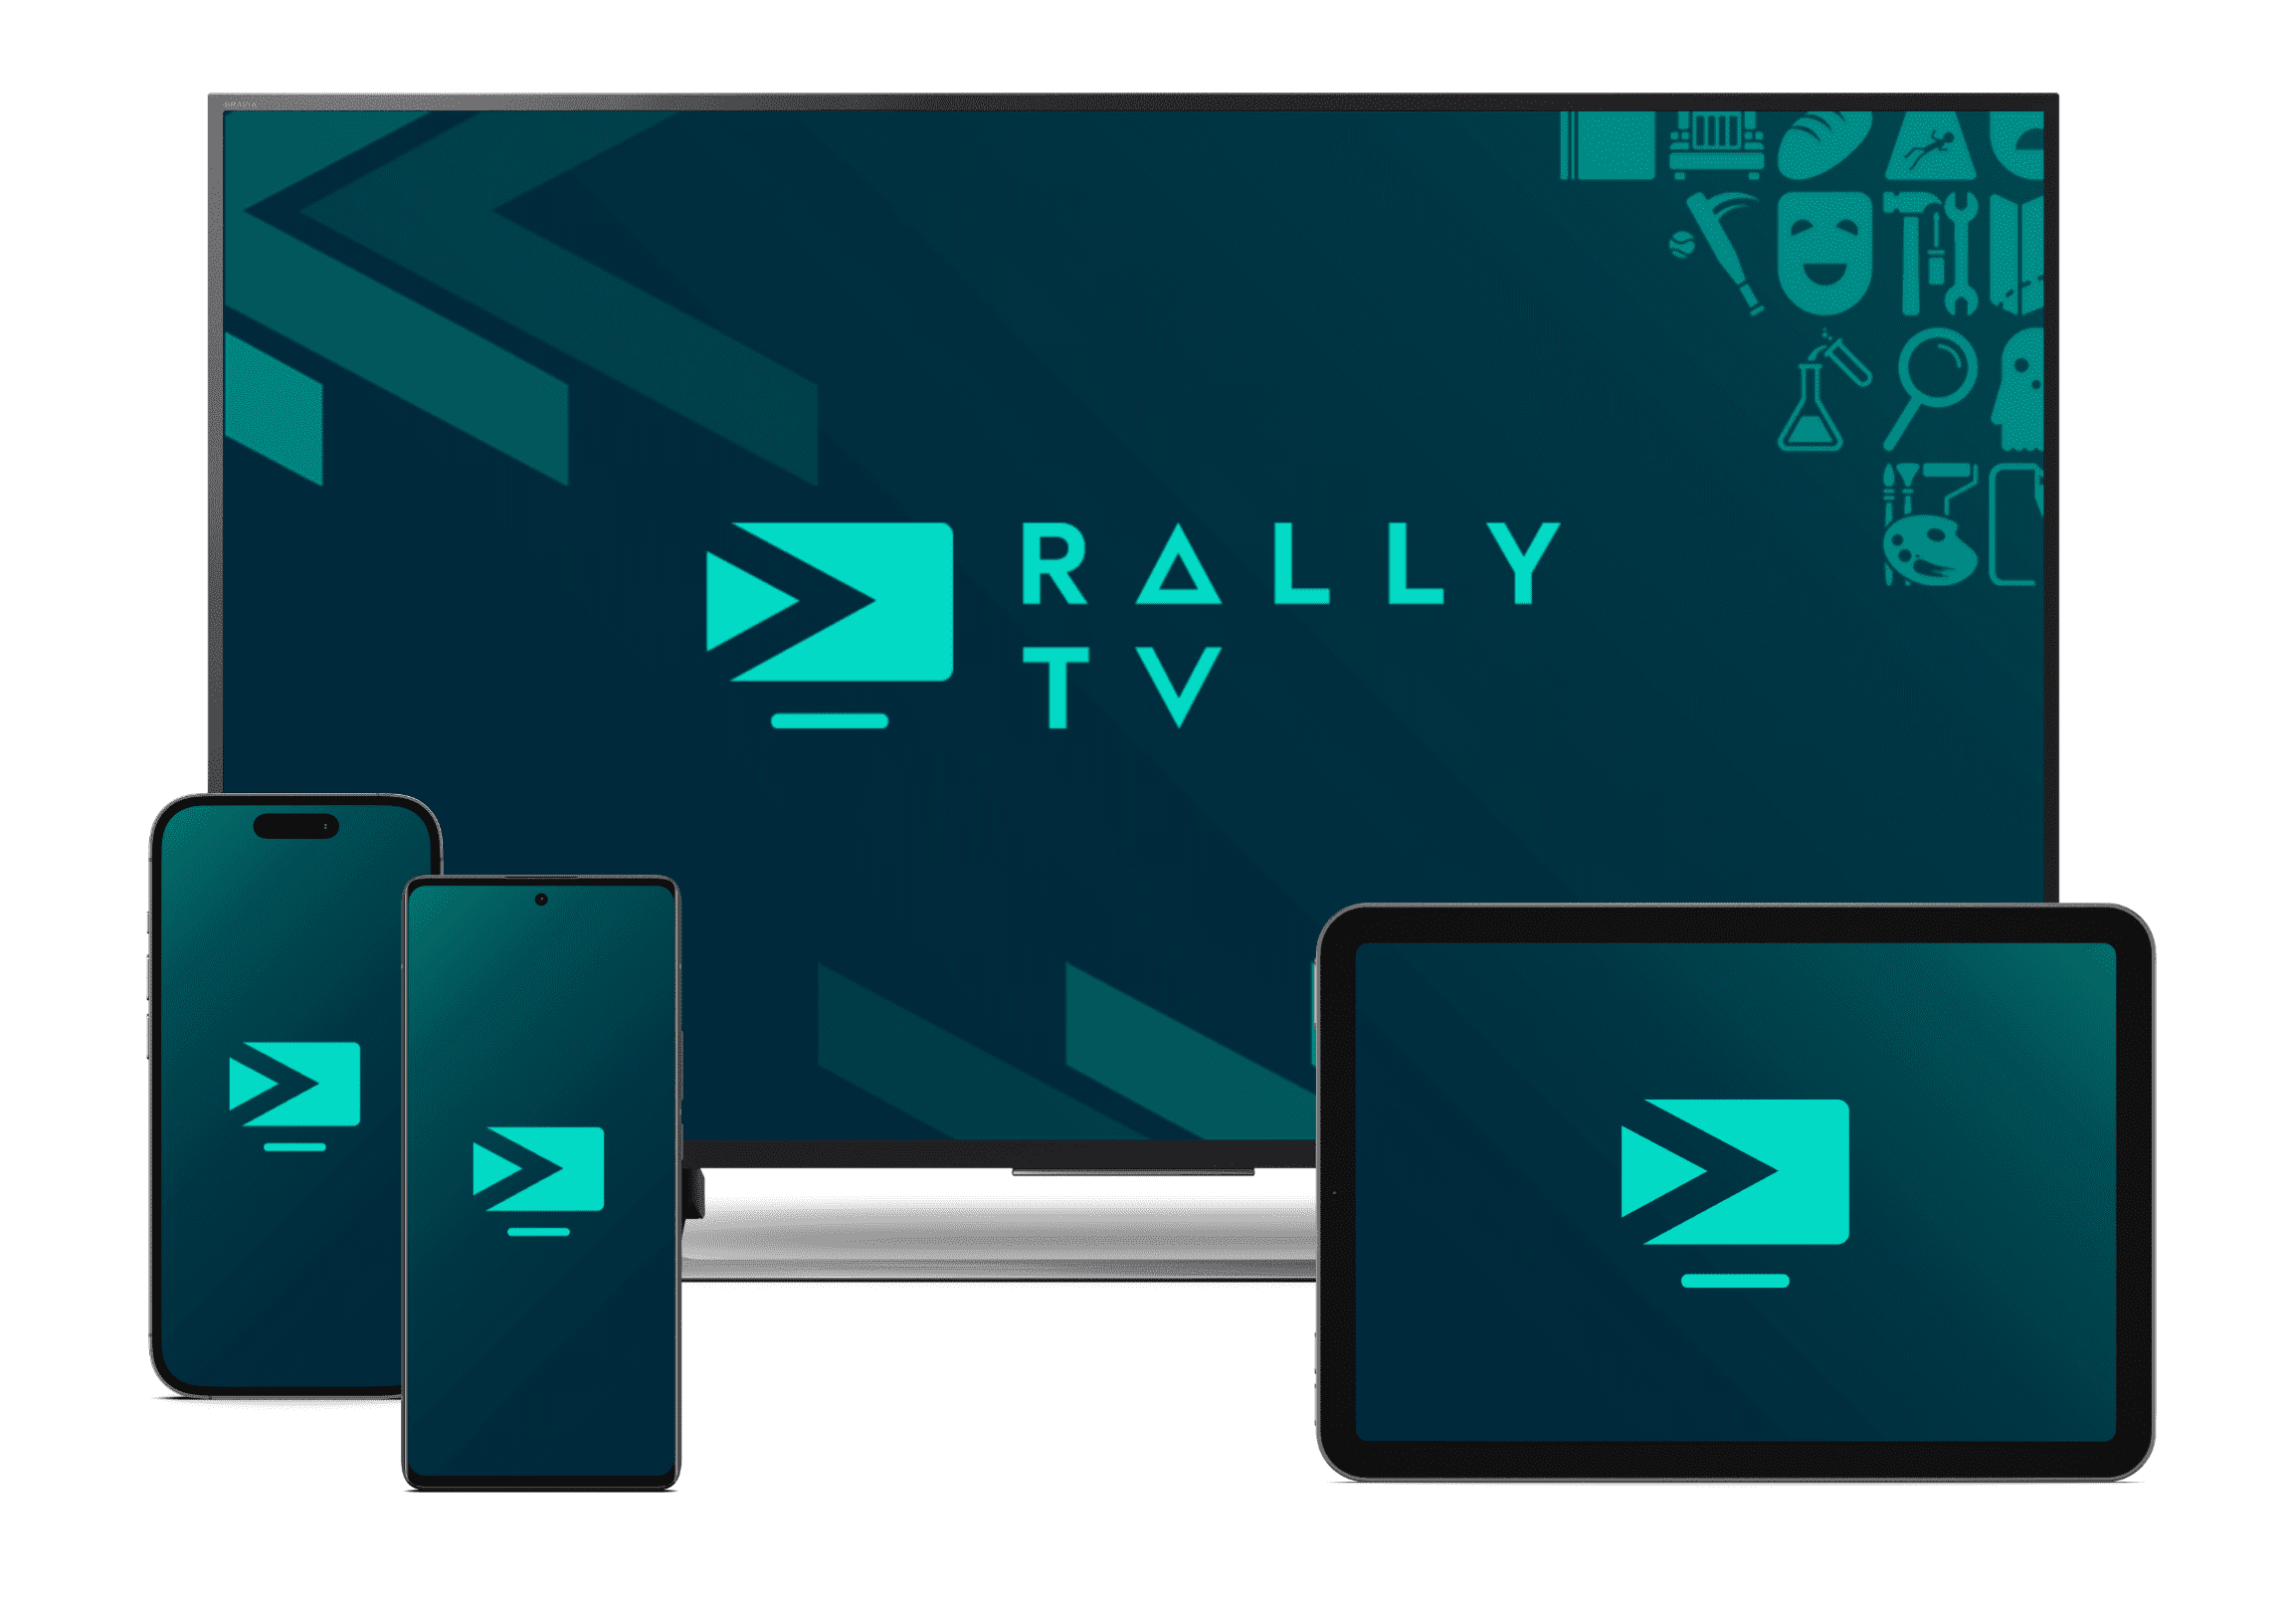 RallyTV watch Live TV at home or on the go